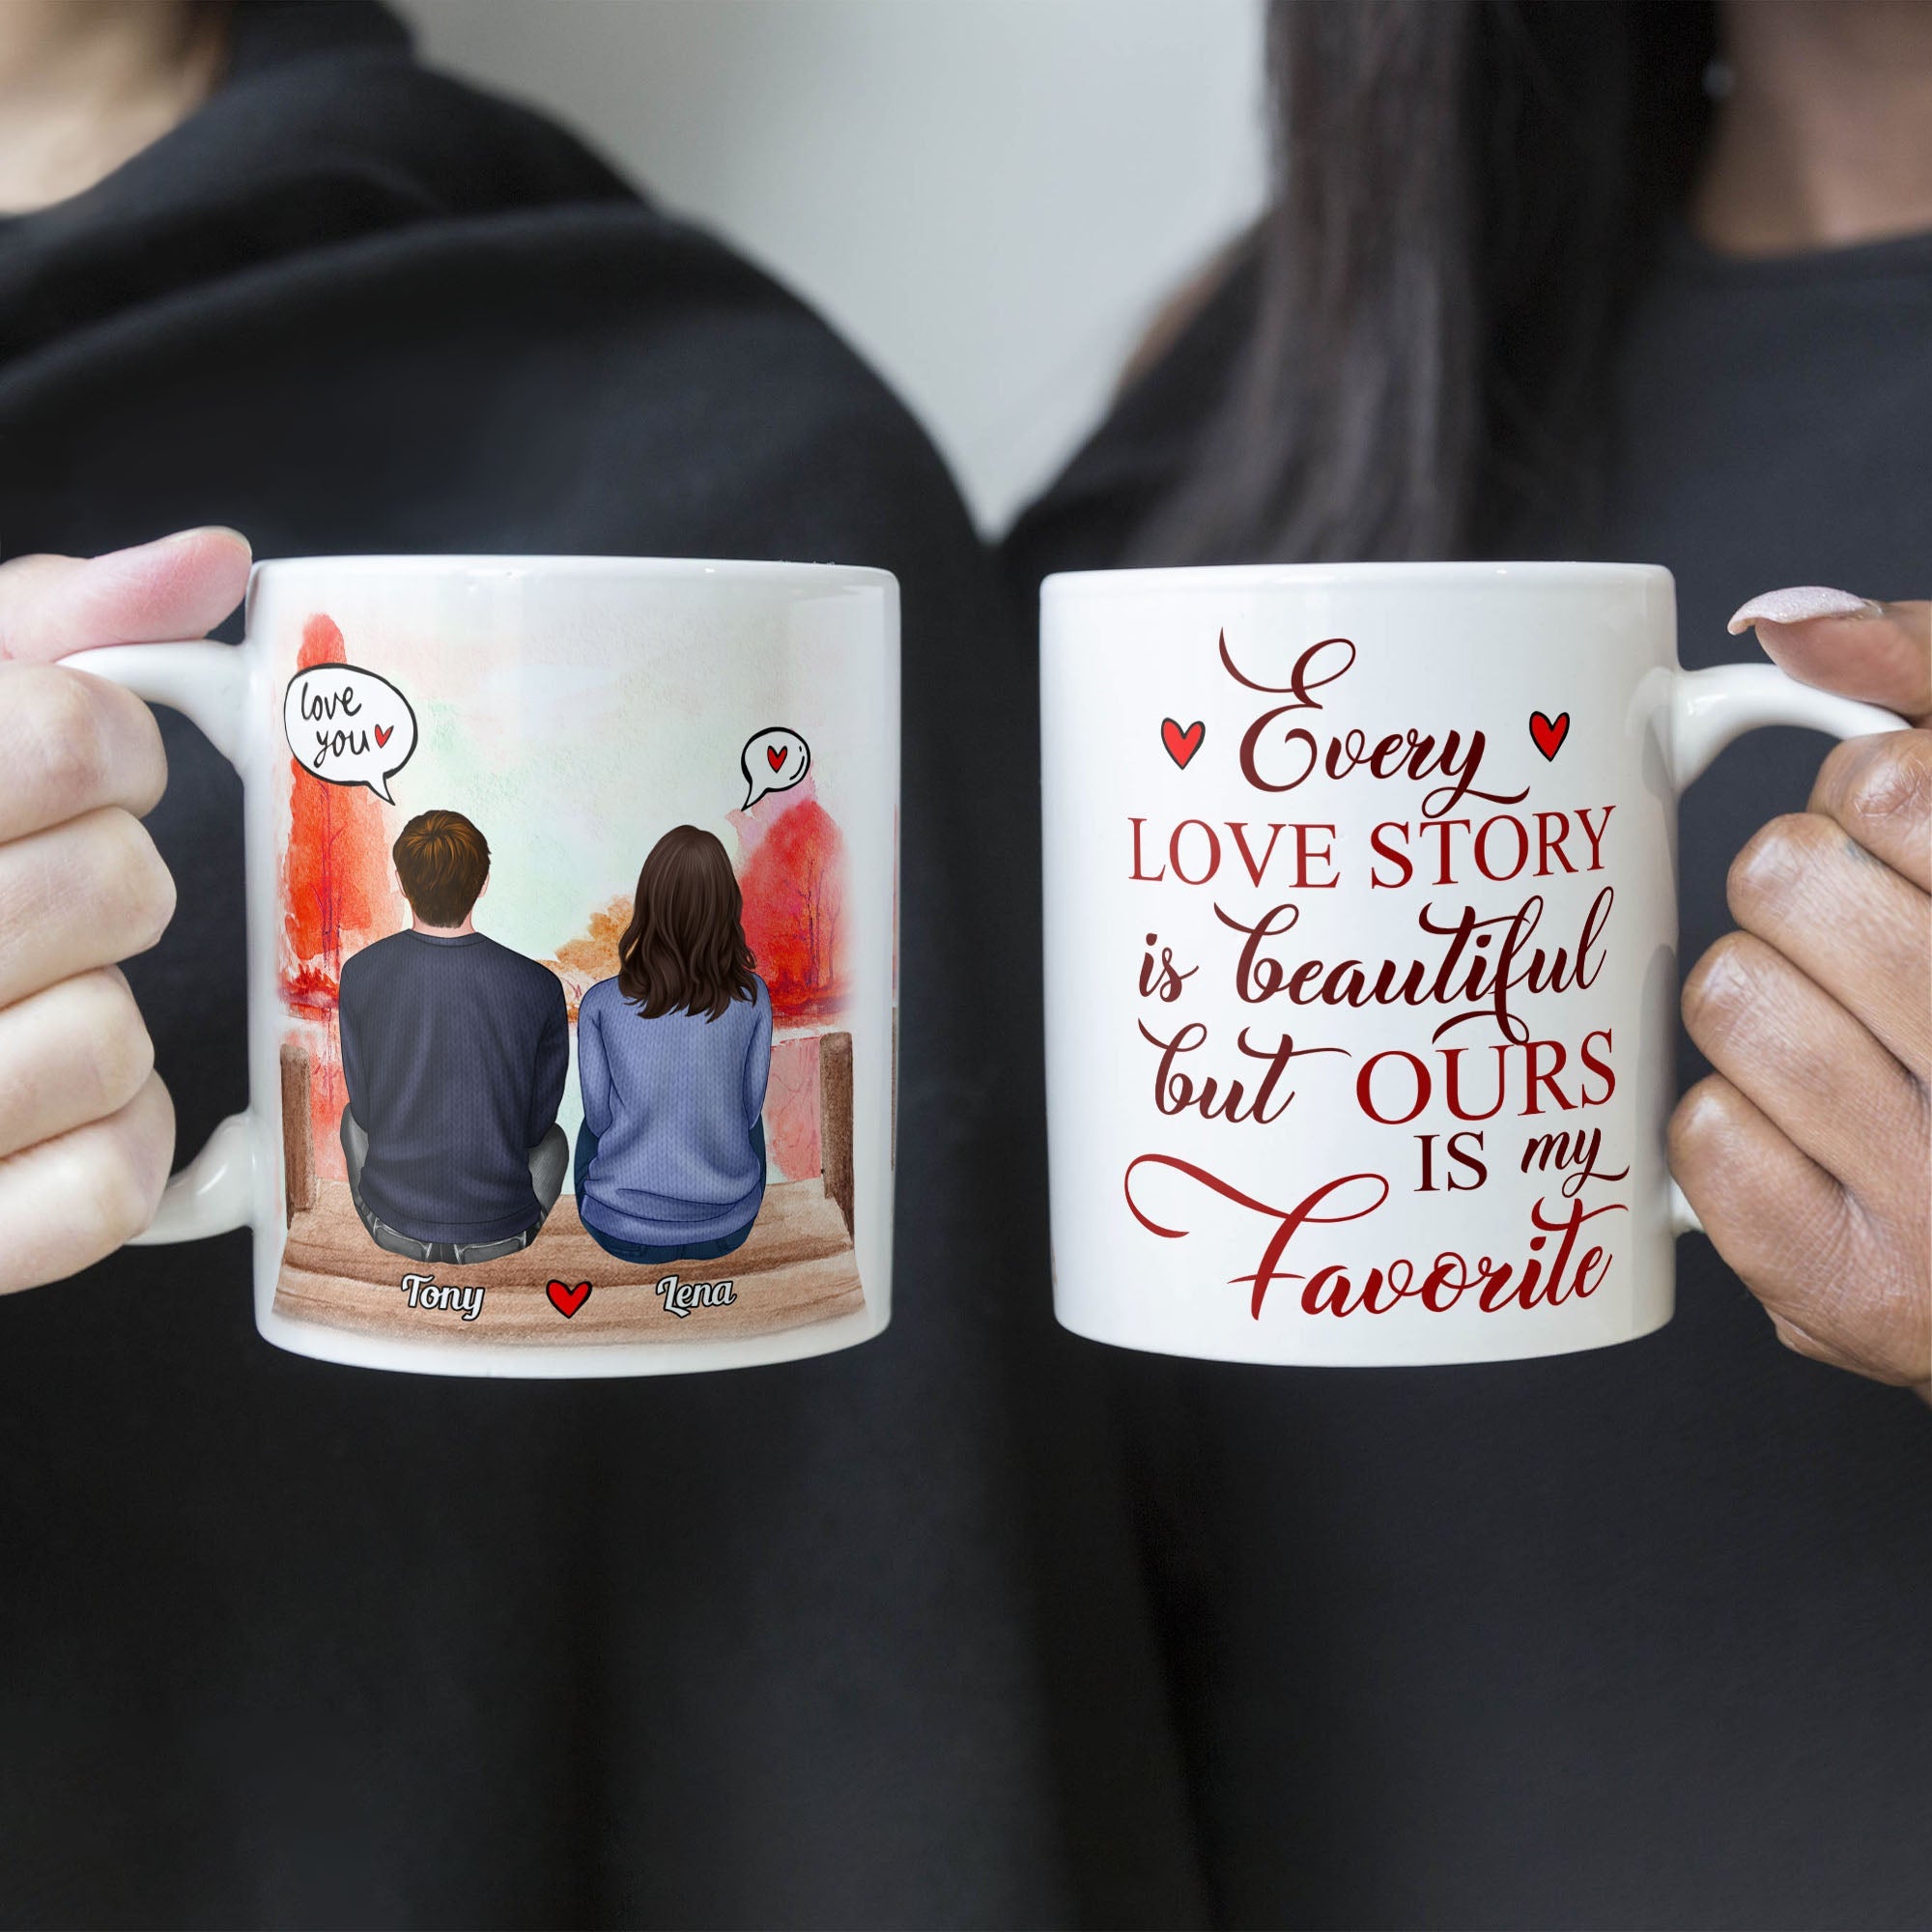 My Favourite Love Story Is Ours - Personalized Mug - Anniversary, Valentine's Day Gift For Spouse, Partner, Couple